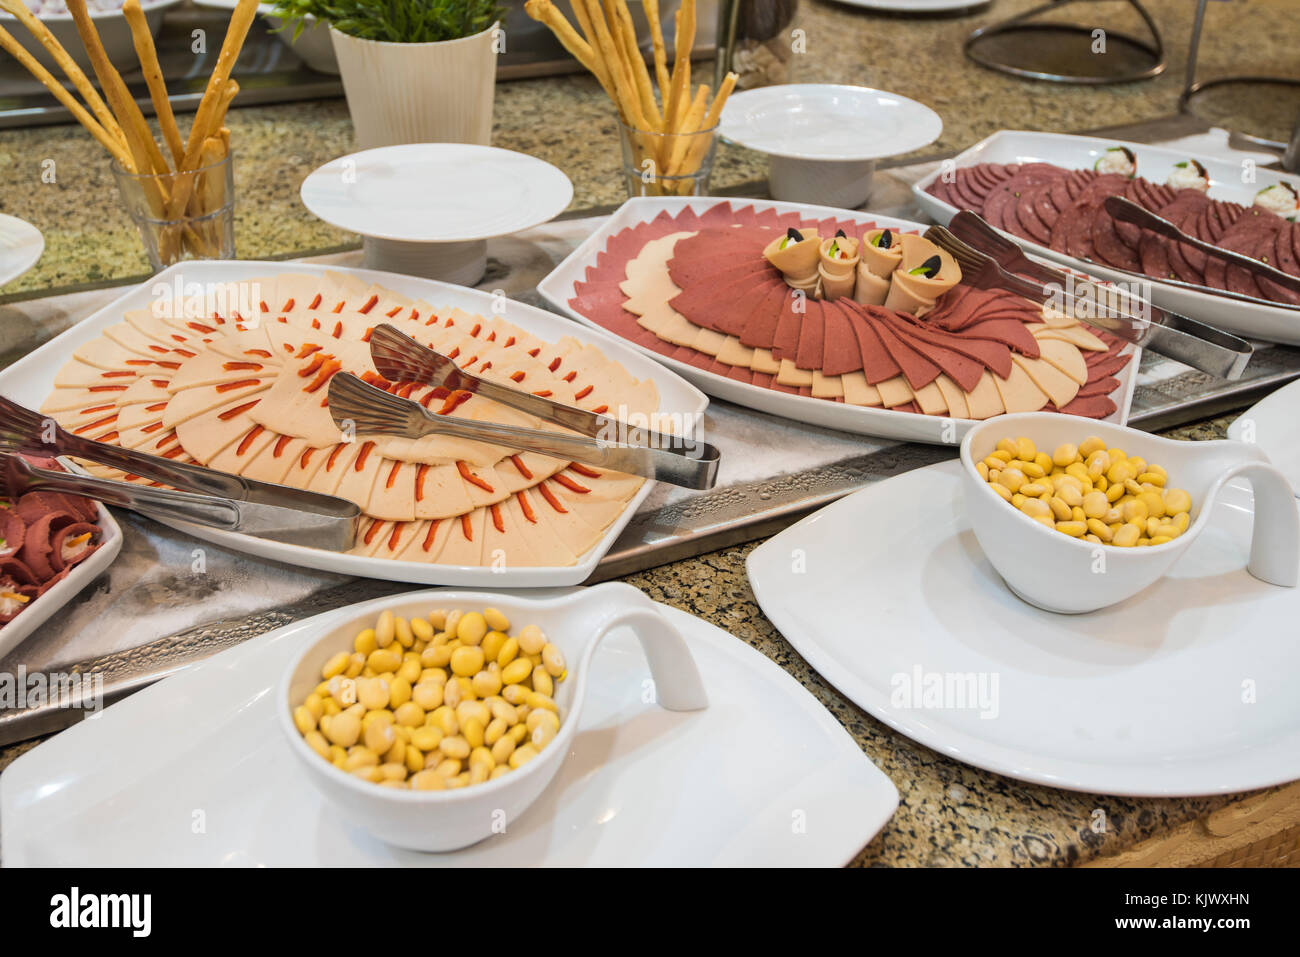 Selection display of cold meat salad food at a luxury restaurant buffet bar area Stock Photo